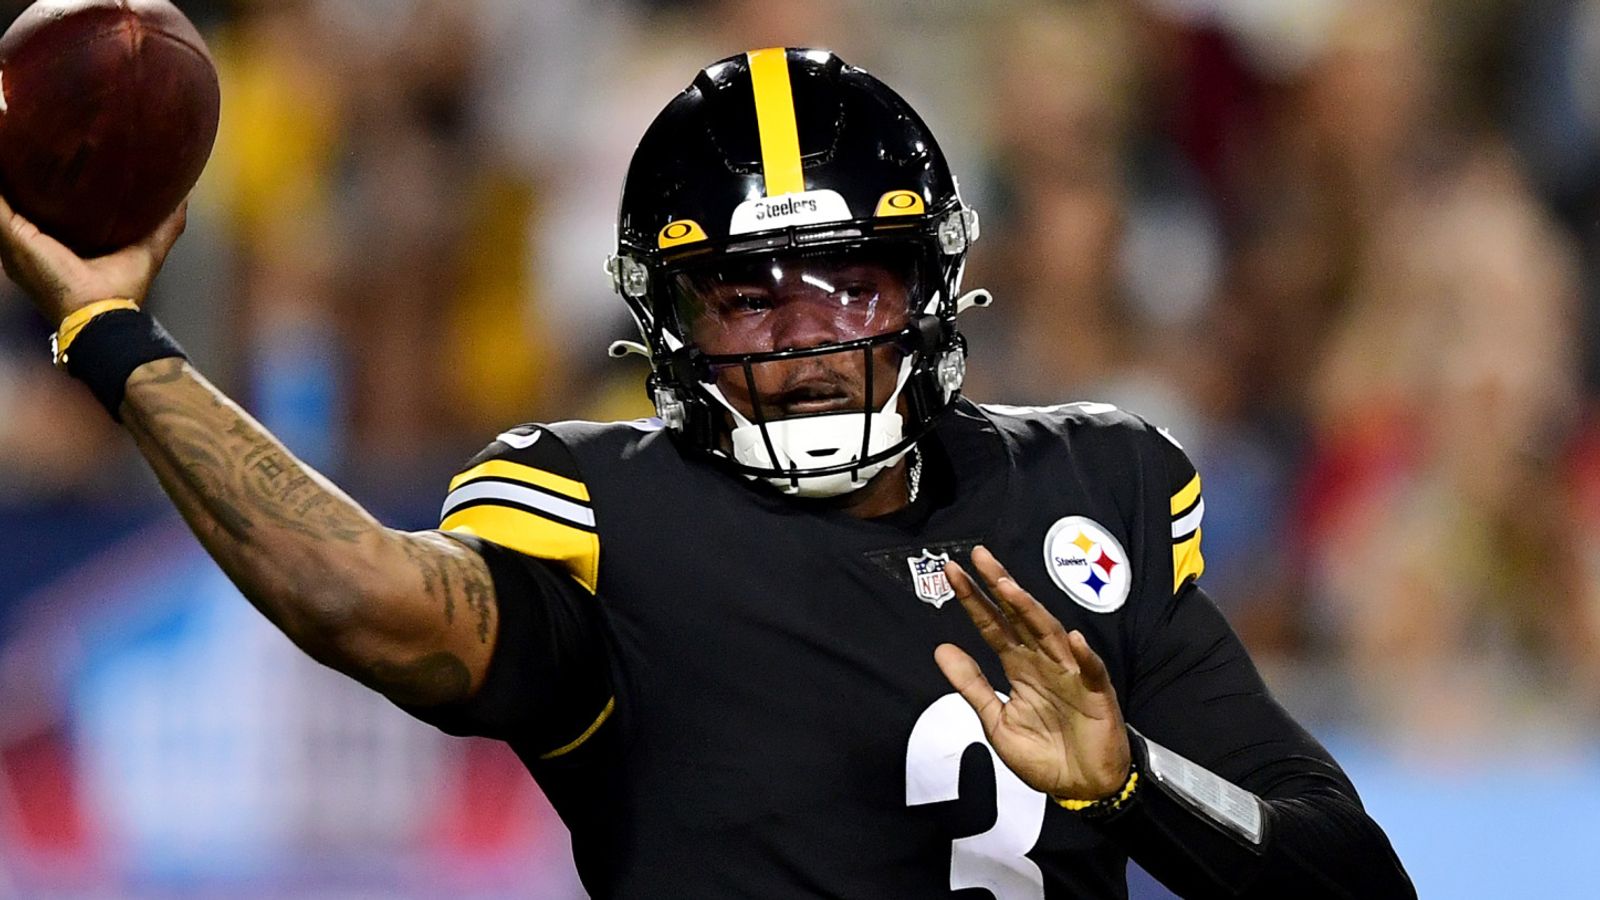 Pittsburgh Steelers 16-3 Dallas Cowboys: Steelers use strong second half to win Hall of Fame Game